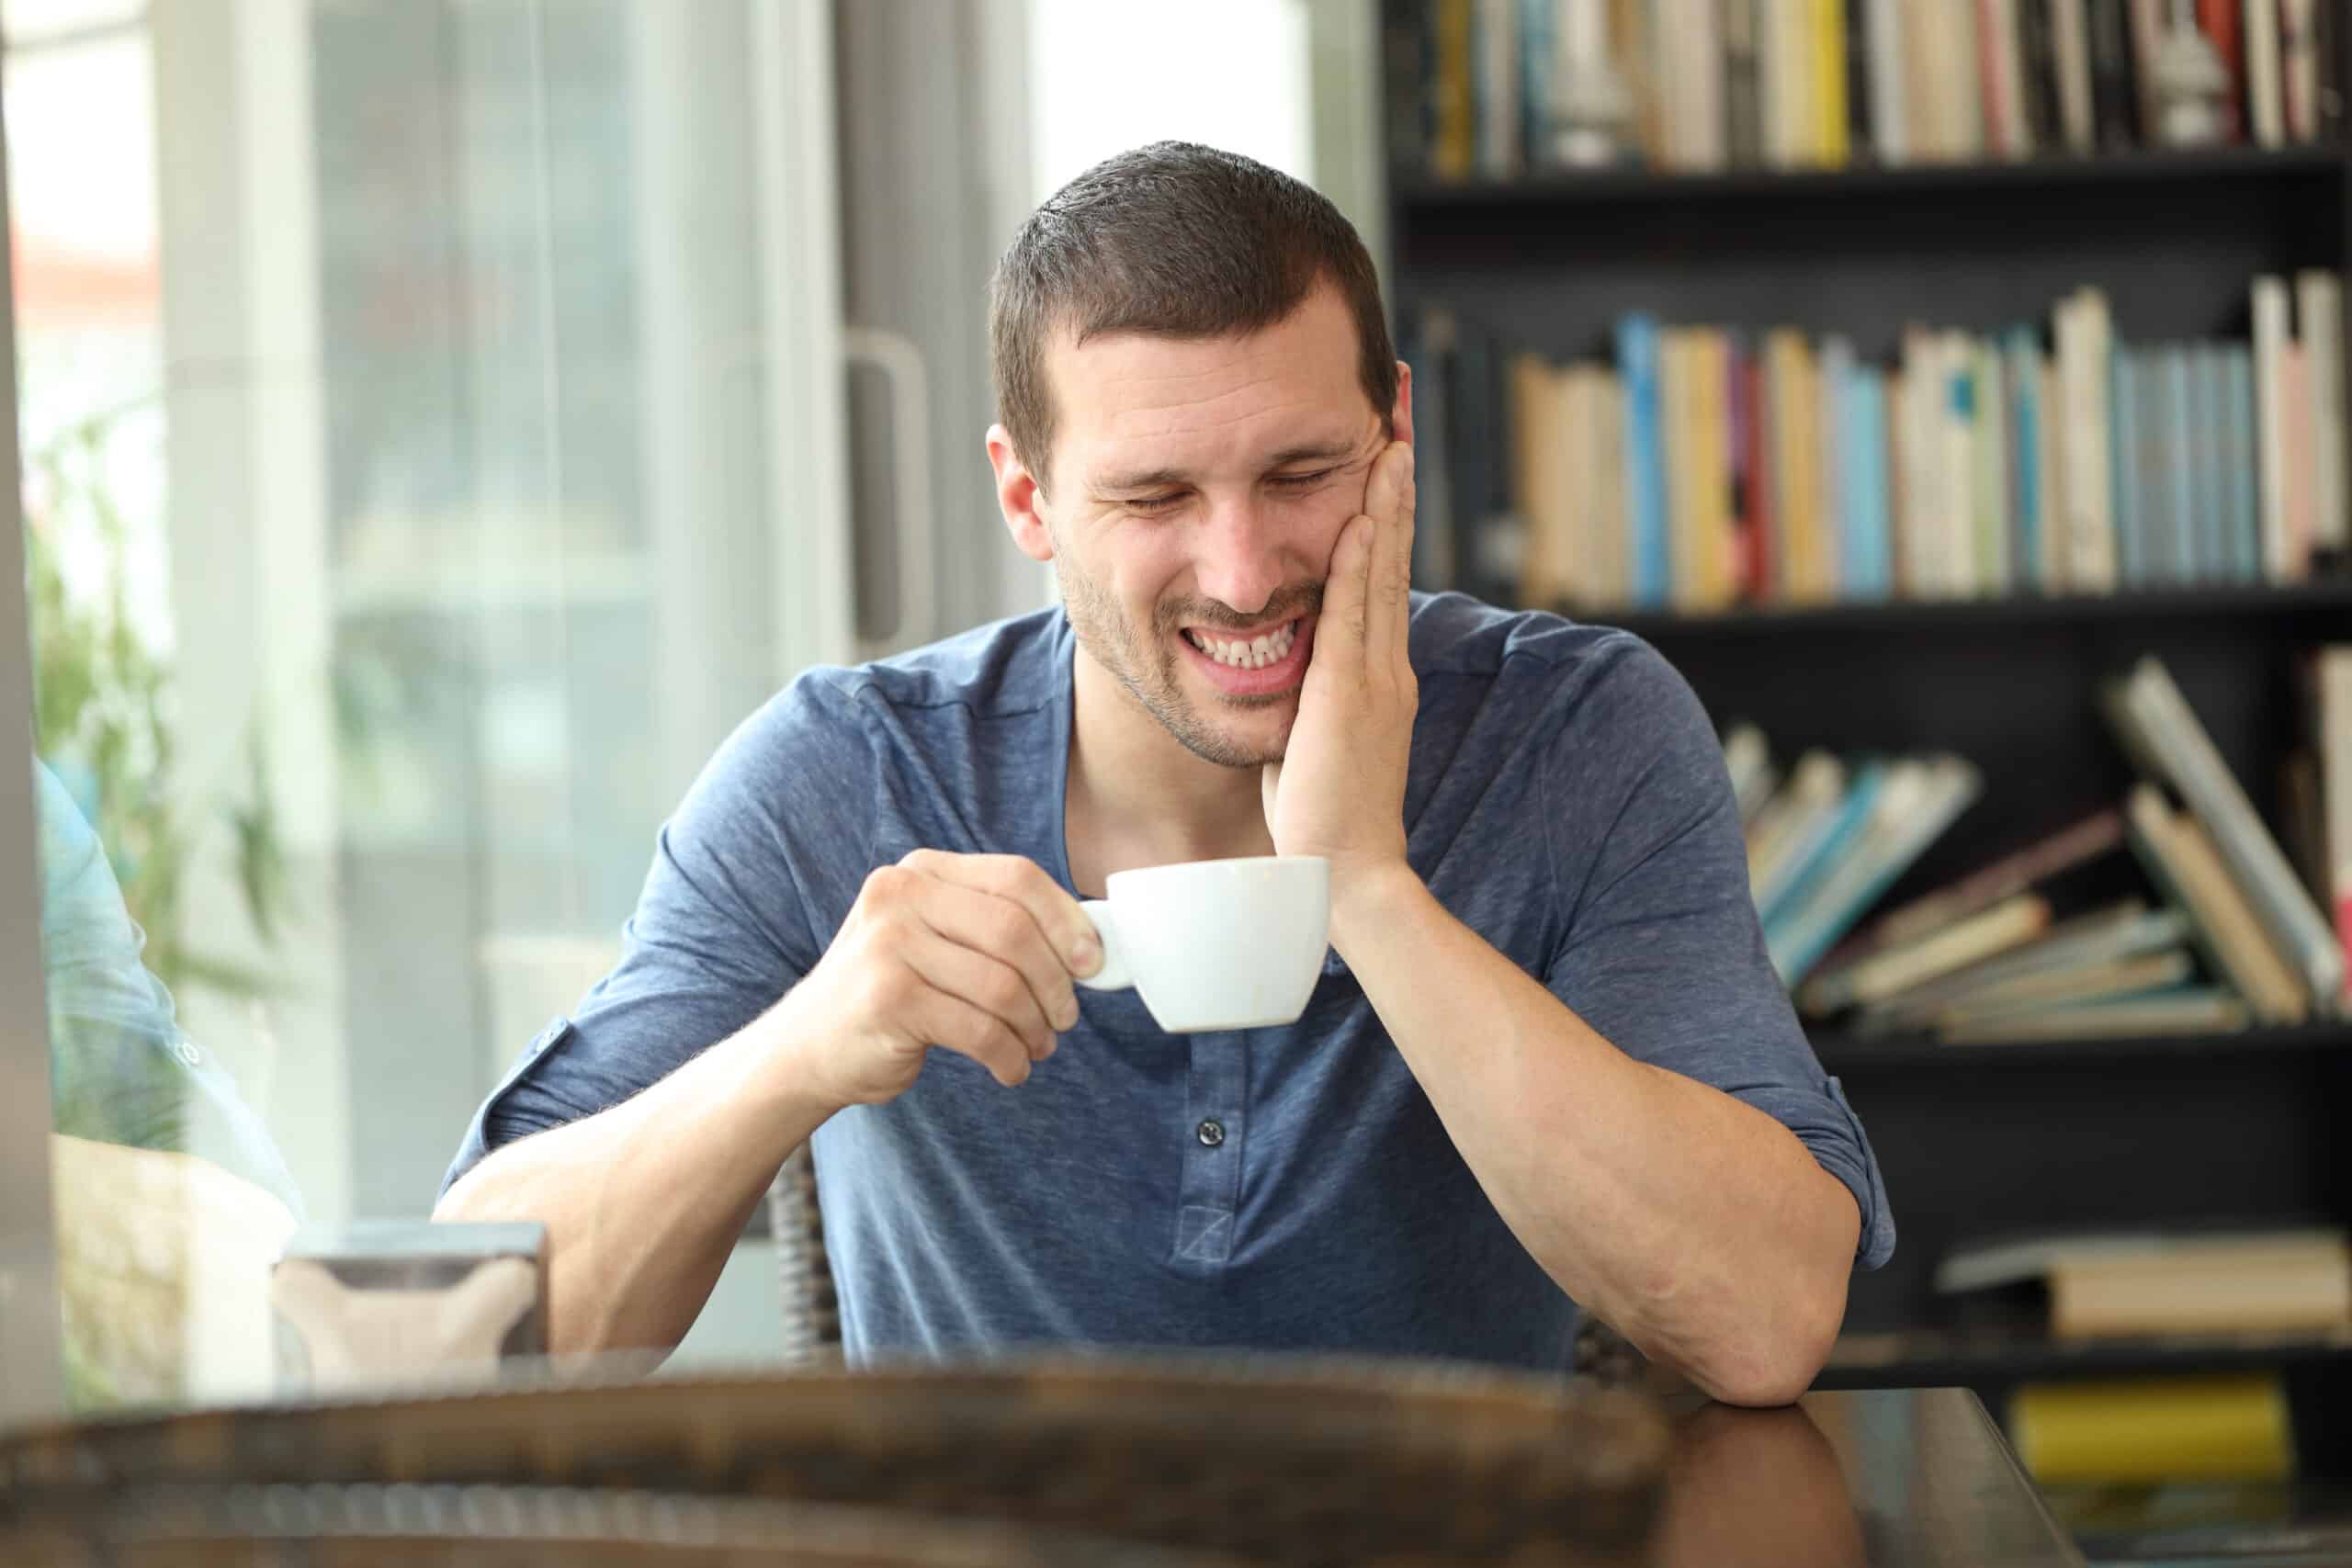 Man drinking coffee reacts to hot beverage with sensitive teeth.